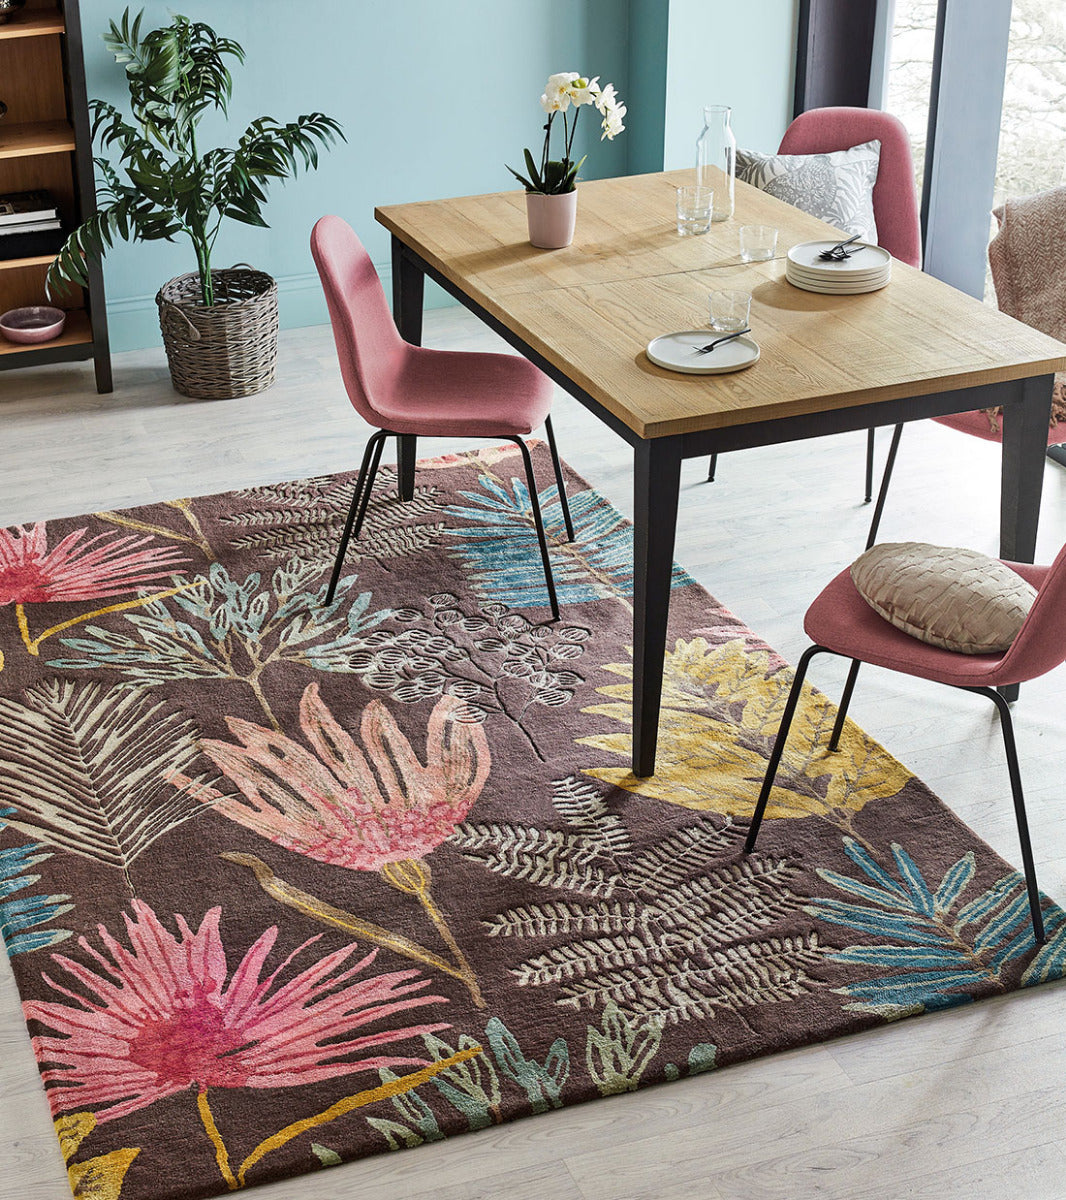 Harlequin rug with a multicolour floral pattern